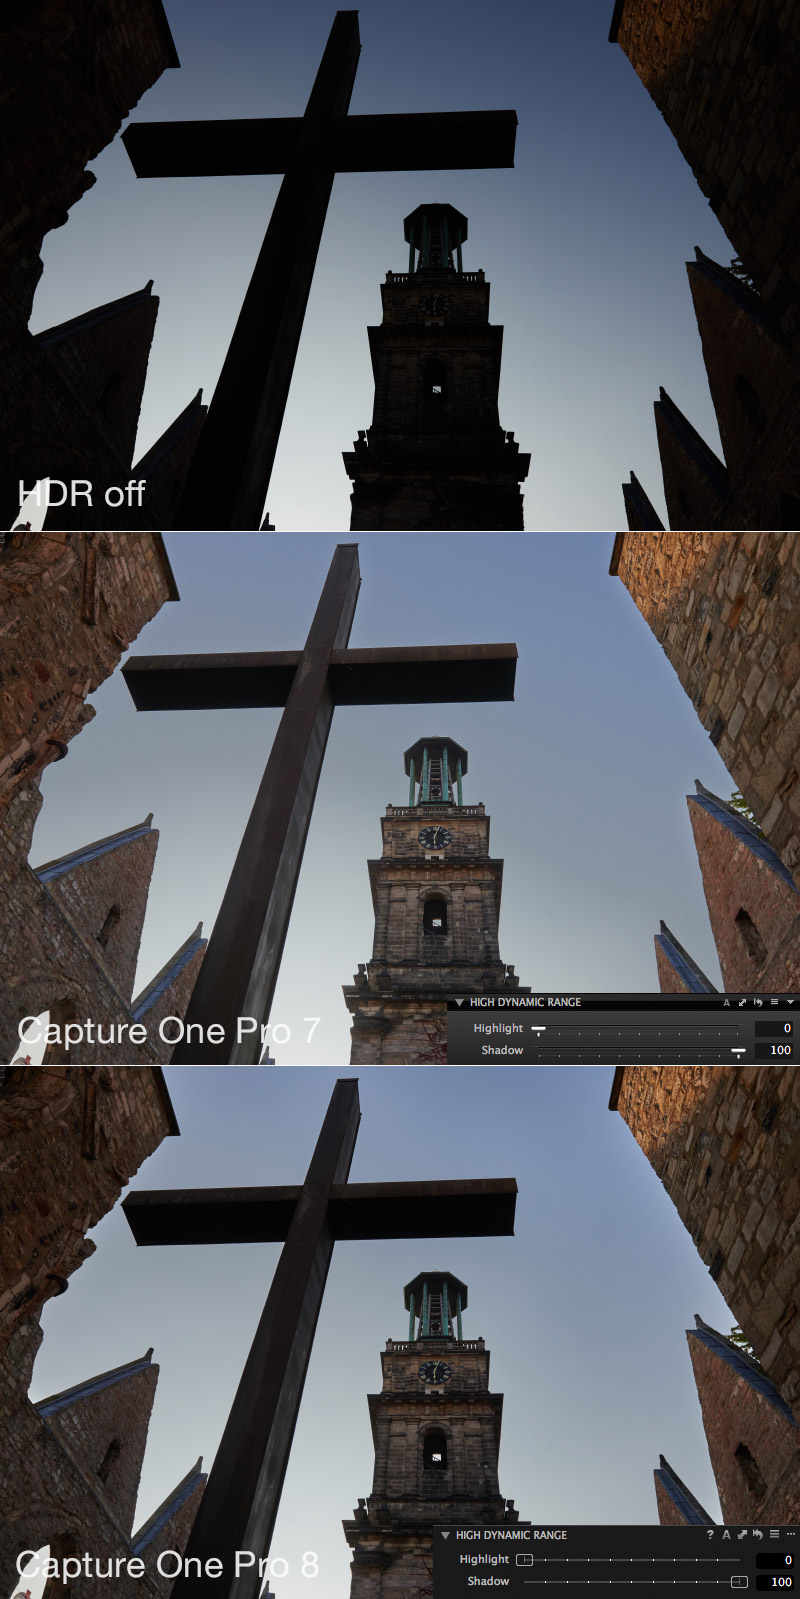 Capture One Pro 8 Review